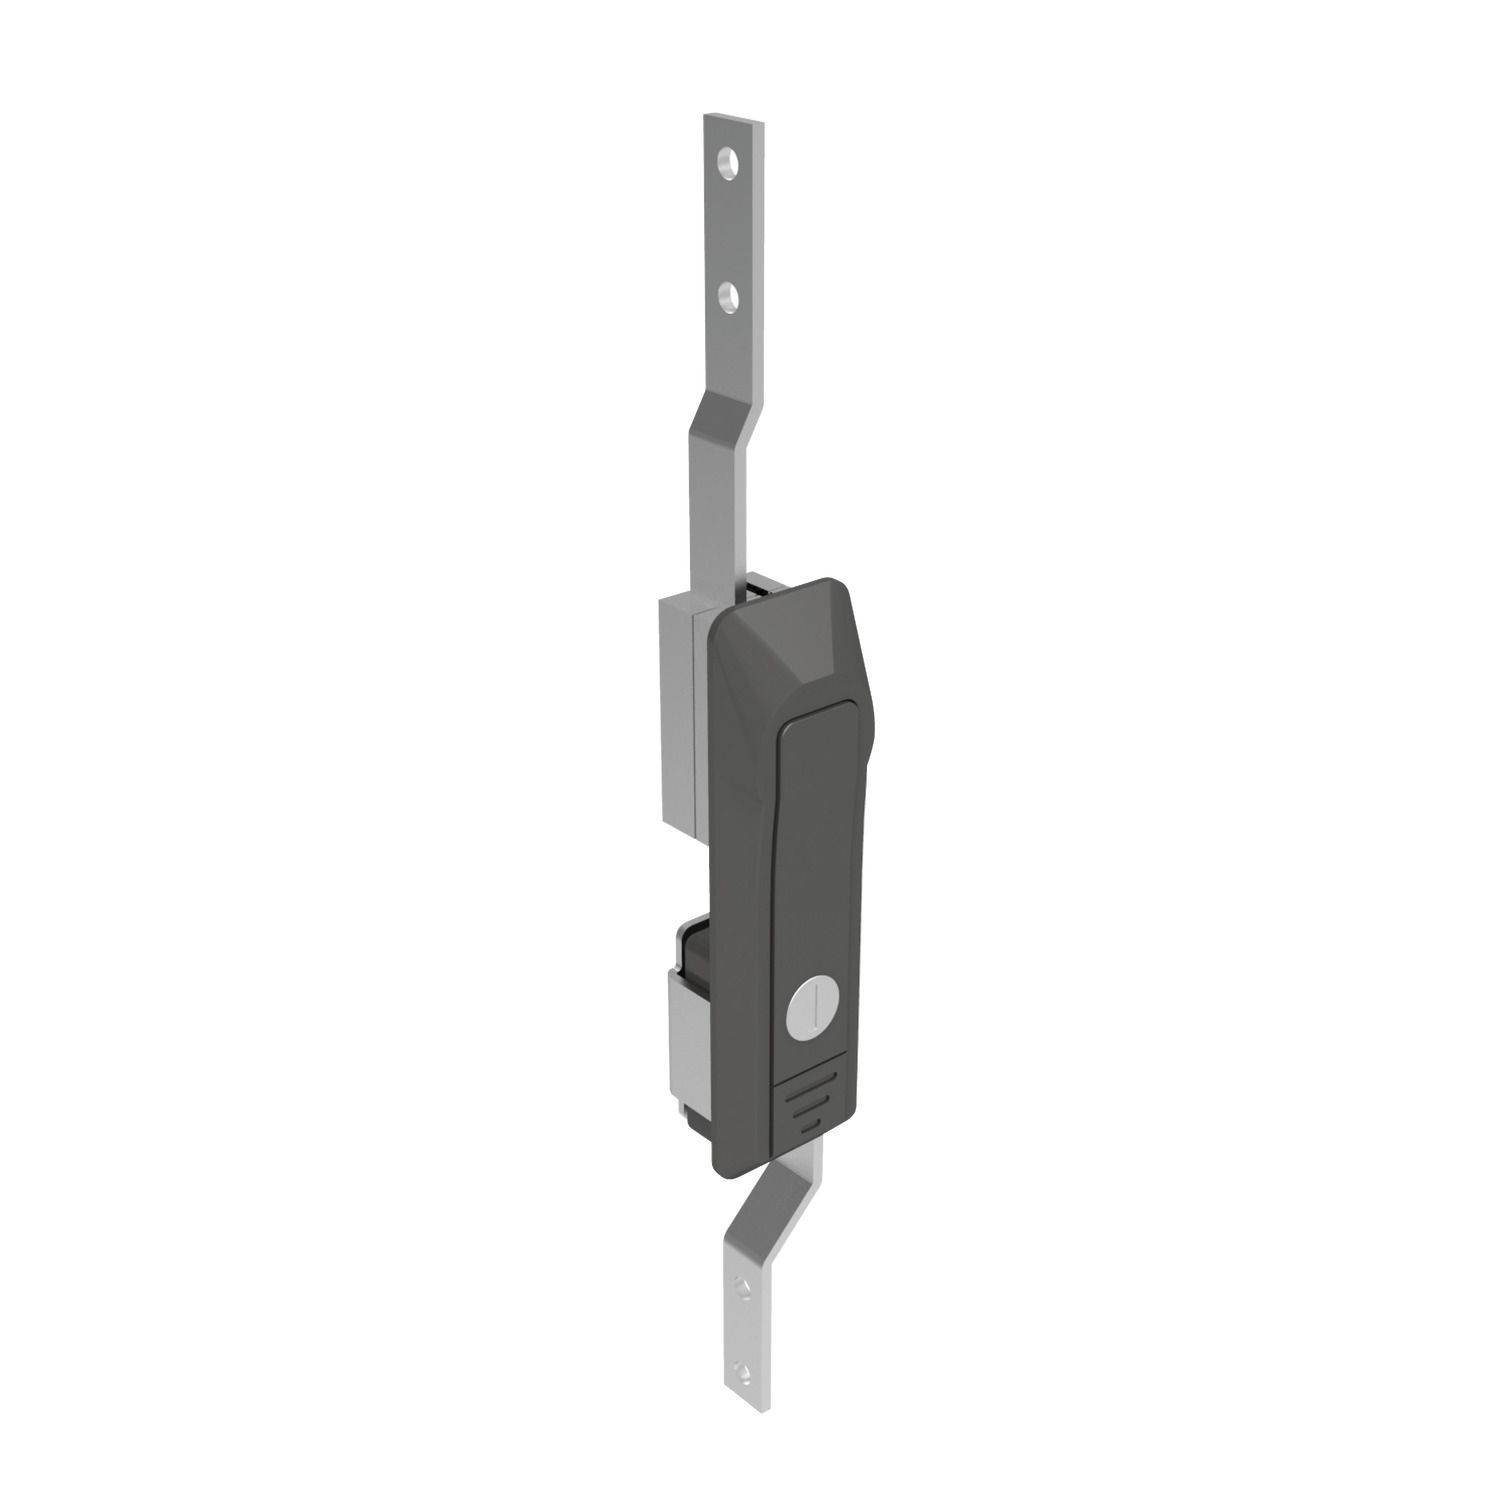 B2380.AW0030 Swing Handles 2 point latching with rod control